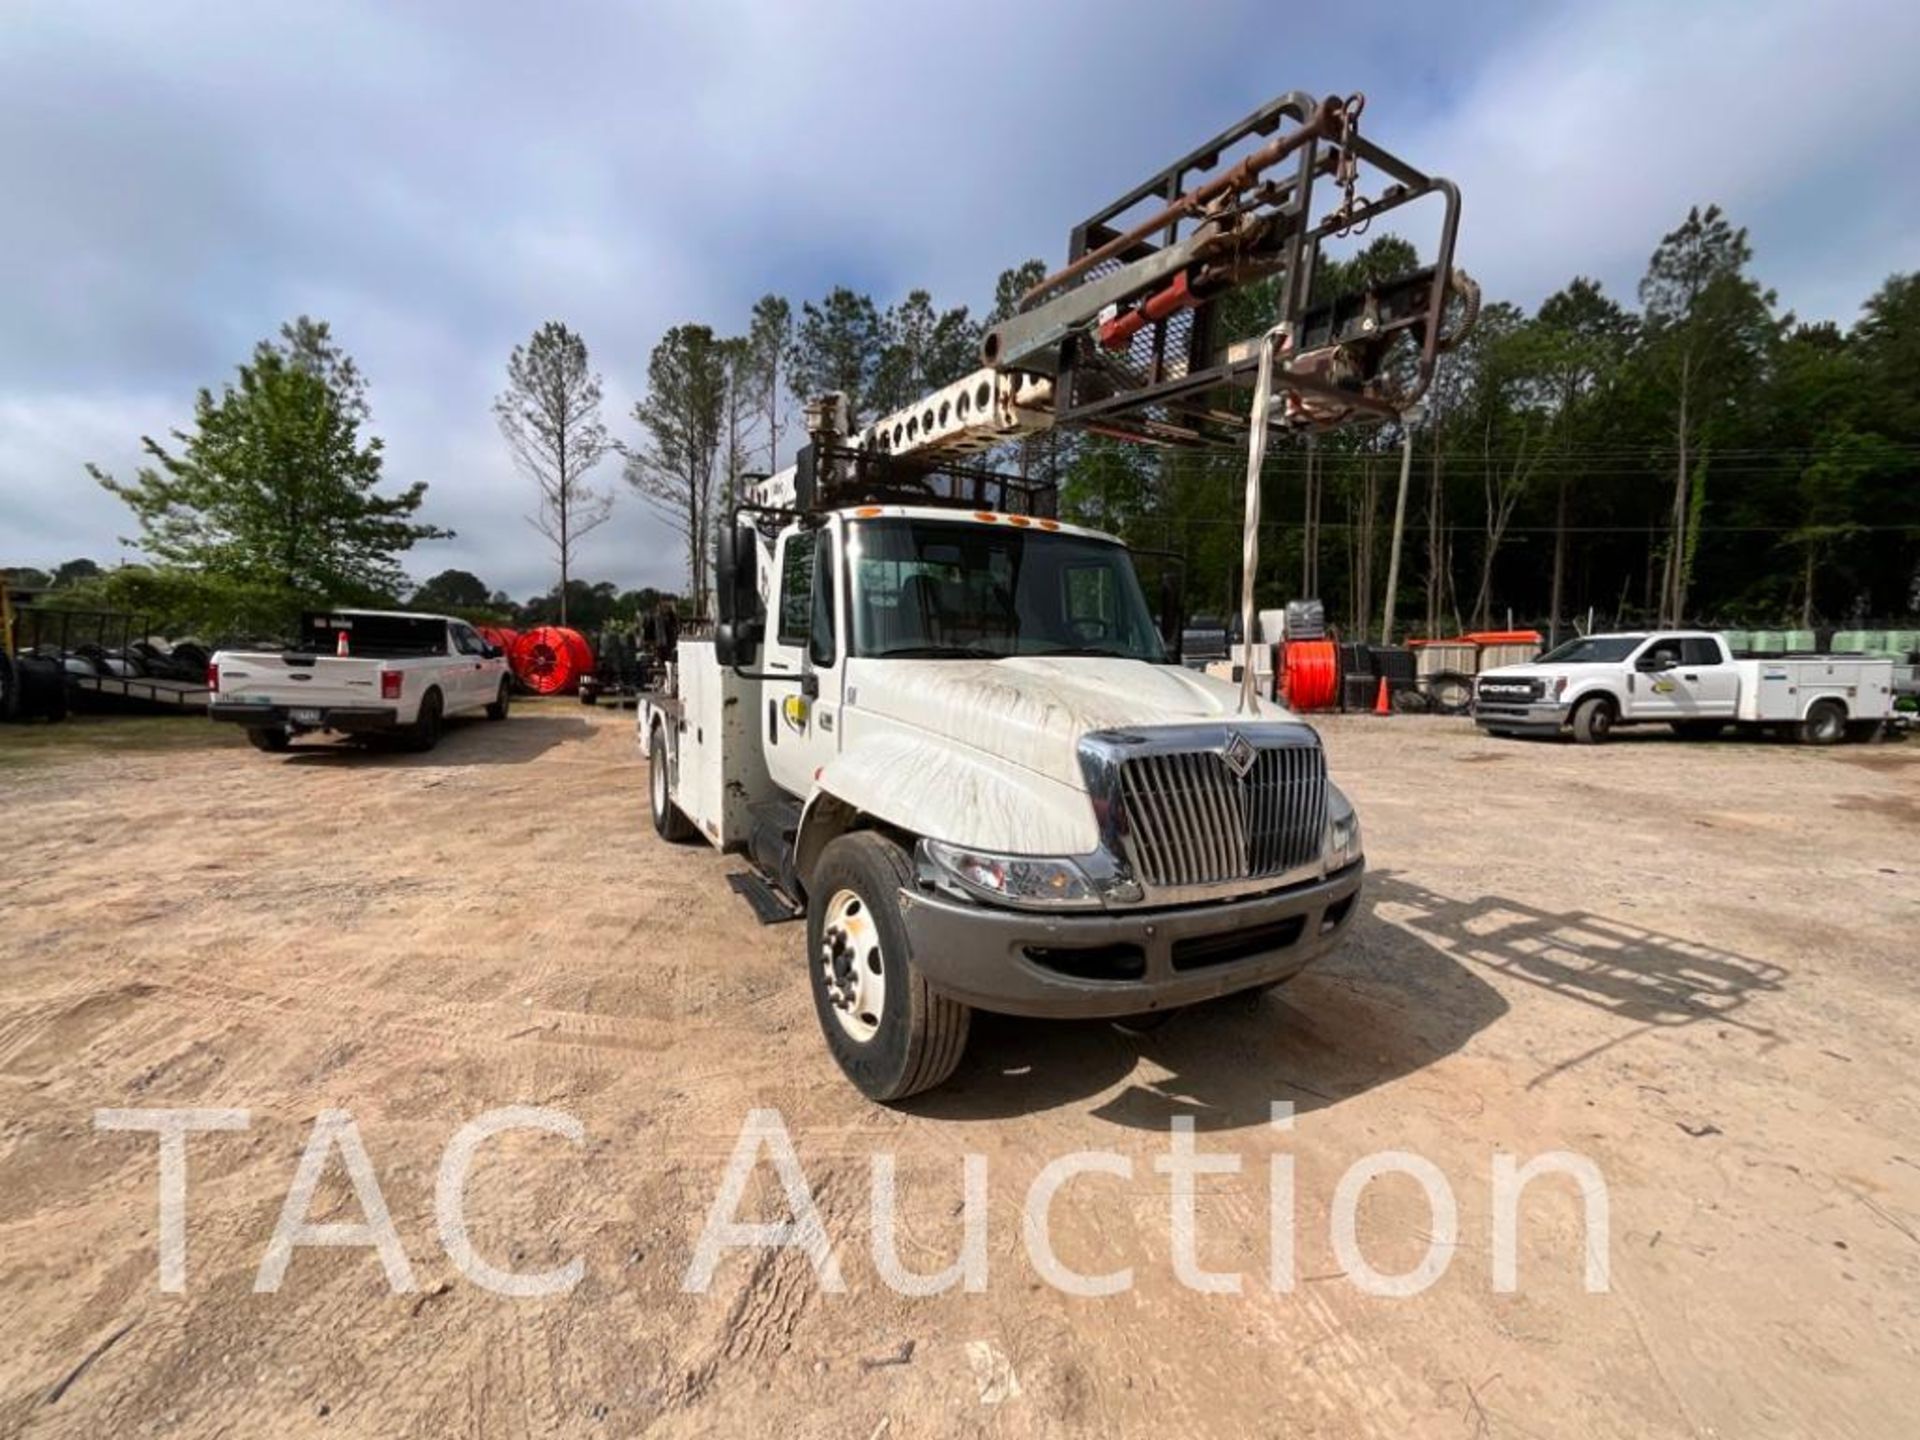 2006 International 4300 Cable Placer Bucket Truck - Image 7 of 64